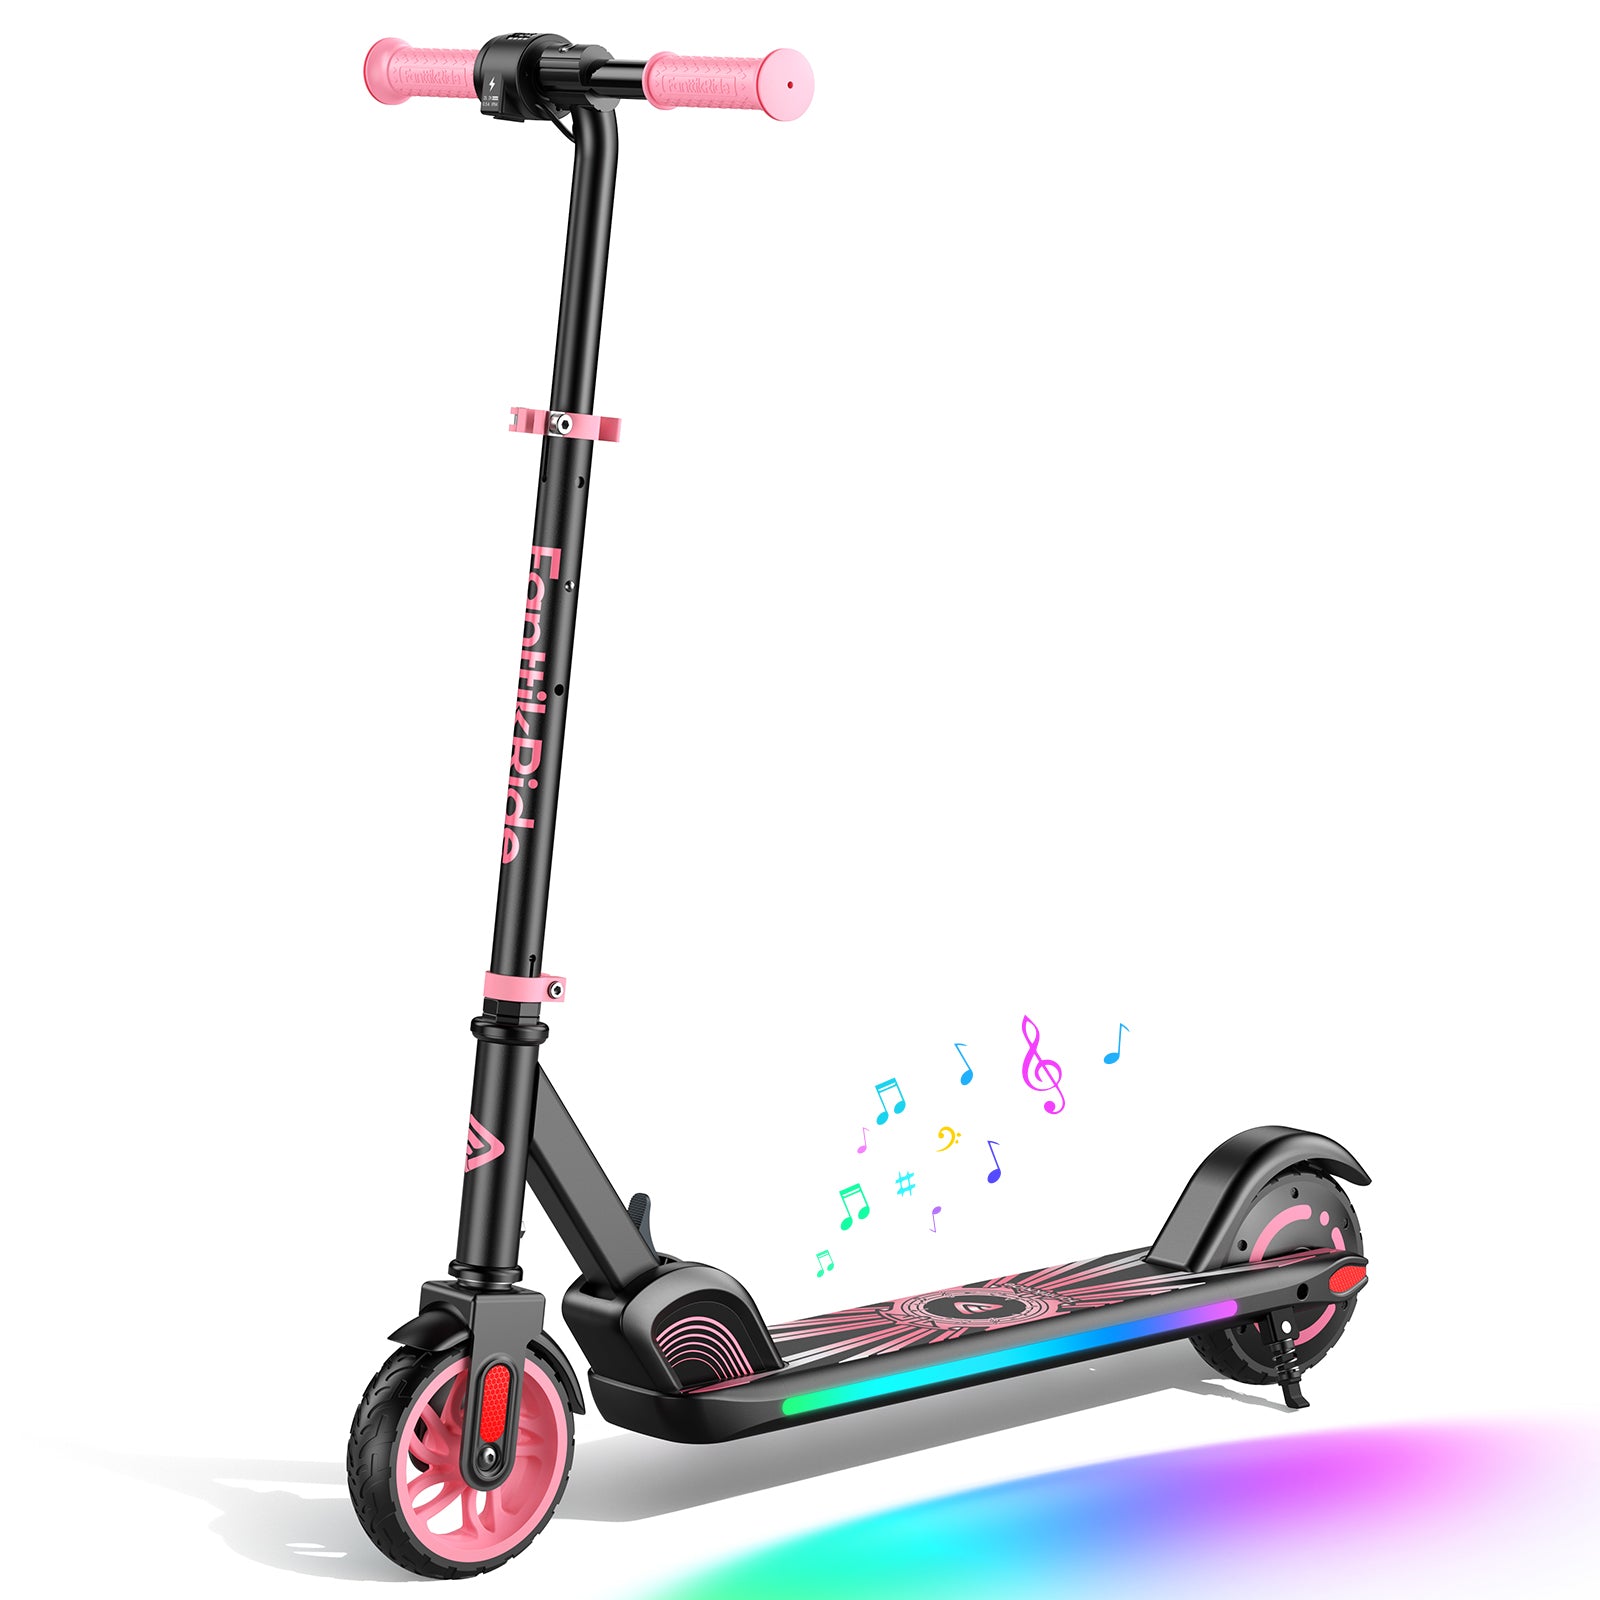 FanttikRide C9 Apex Electric Scooter for Kids Ages 8-12, Bluetooth Music Speaker, Colorful Rainbow Lights, 5/8/10MPH, 5 Miles Range, Adjustable Height, Foldable, Gift for Teens up to 132 lbs,